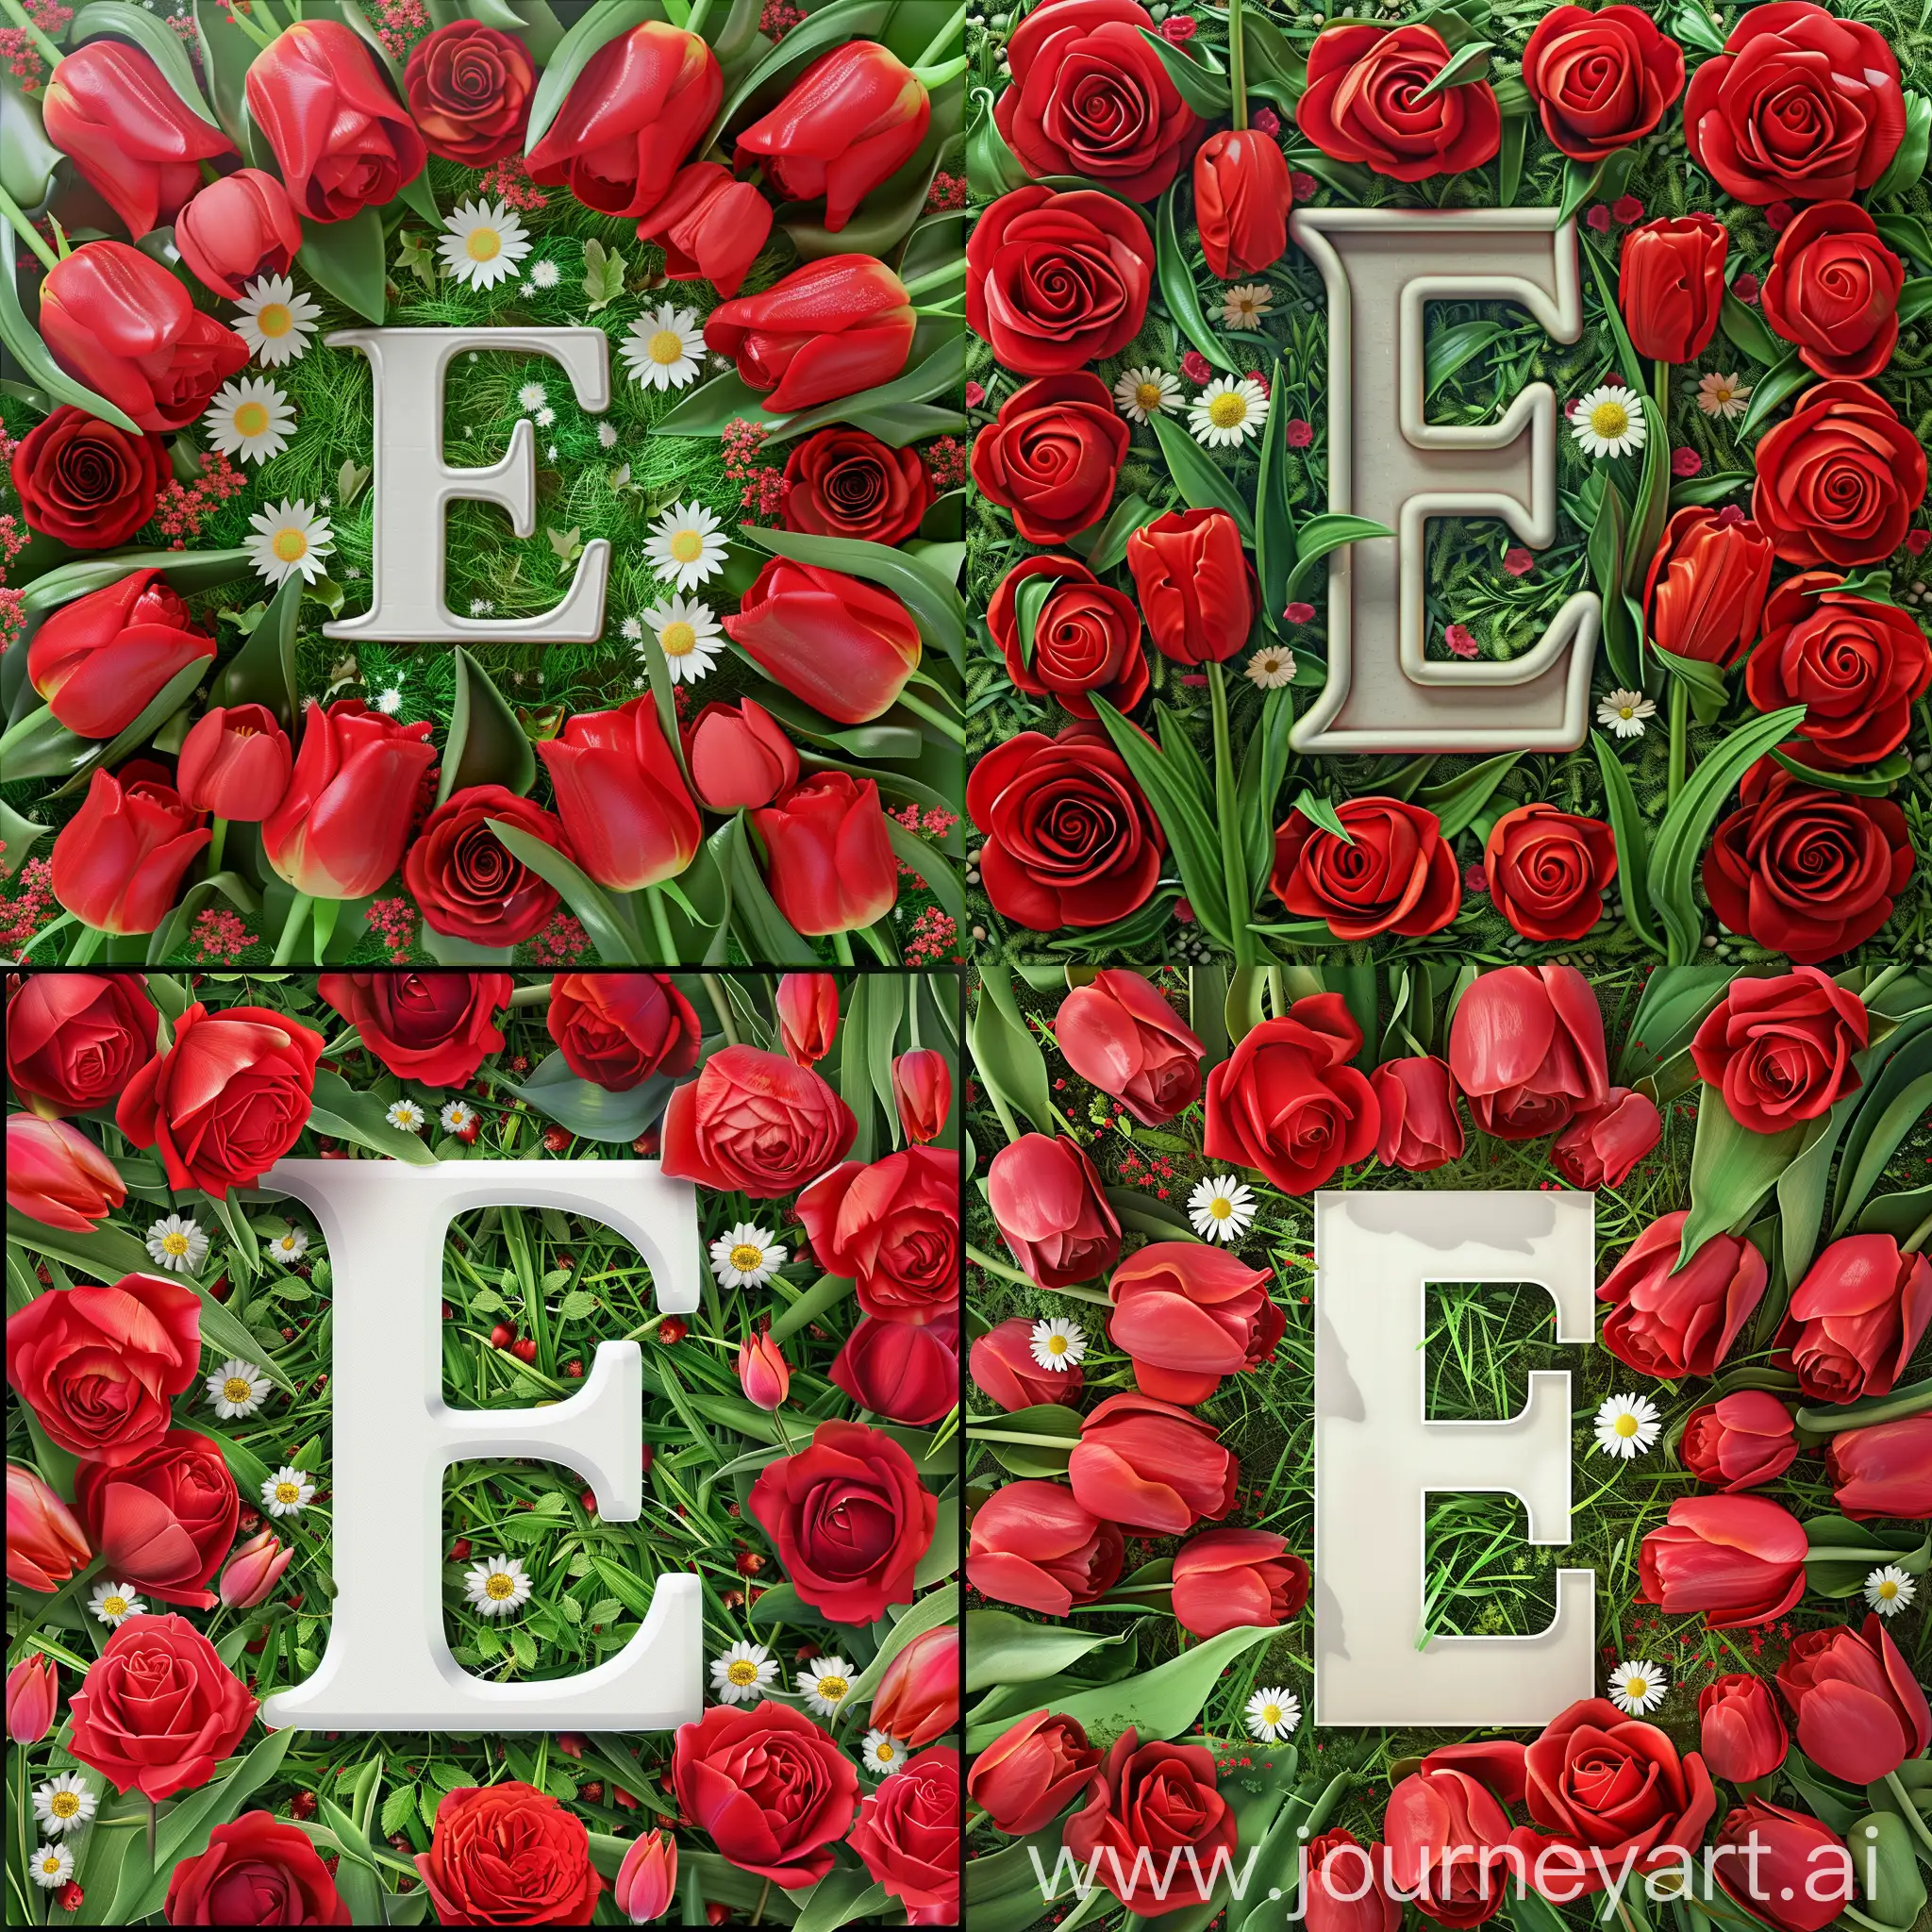 Vibrant-Red-Roses-and-Tulips-Surrounding-Detailed-White-Letter-E